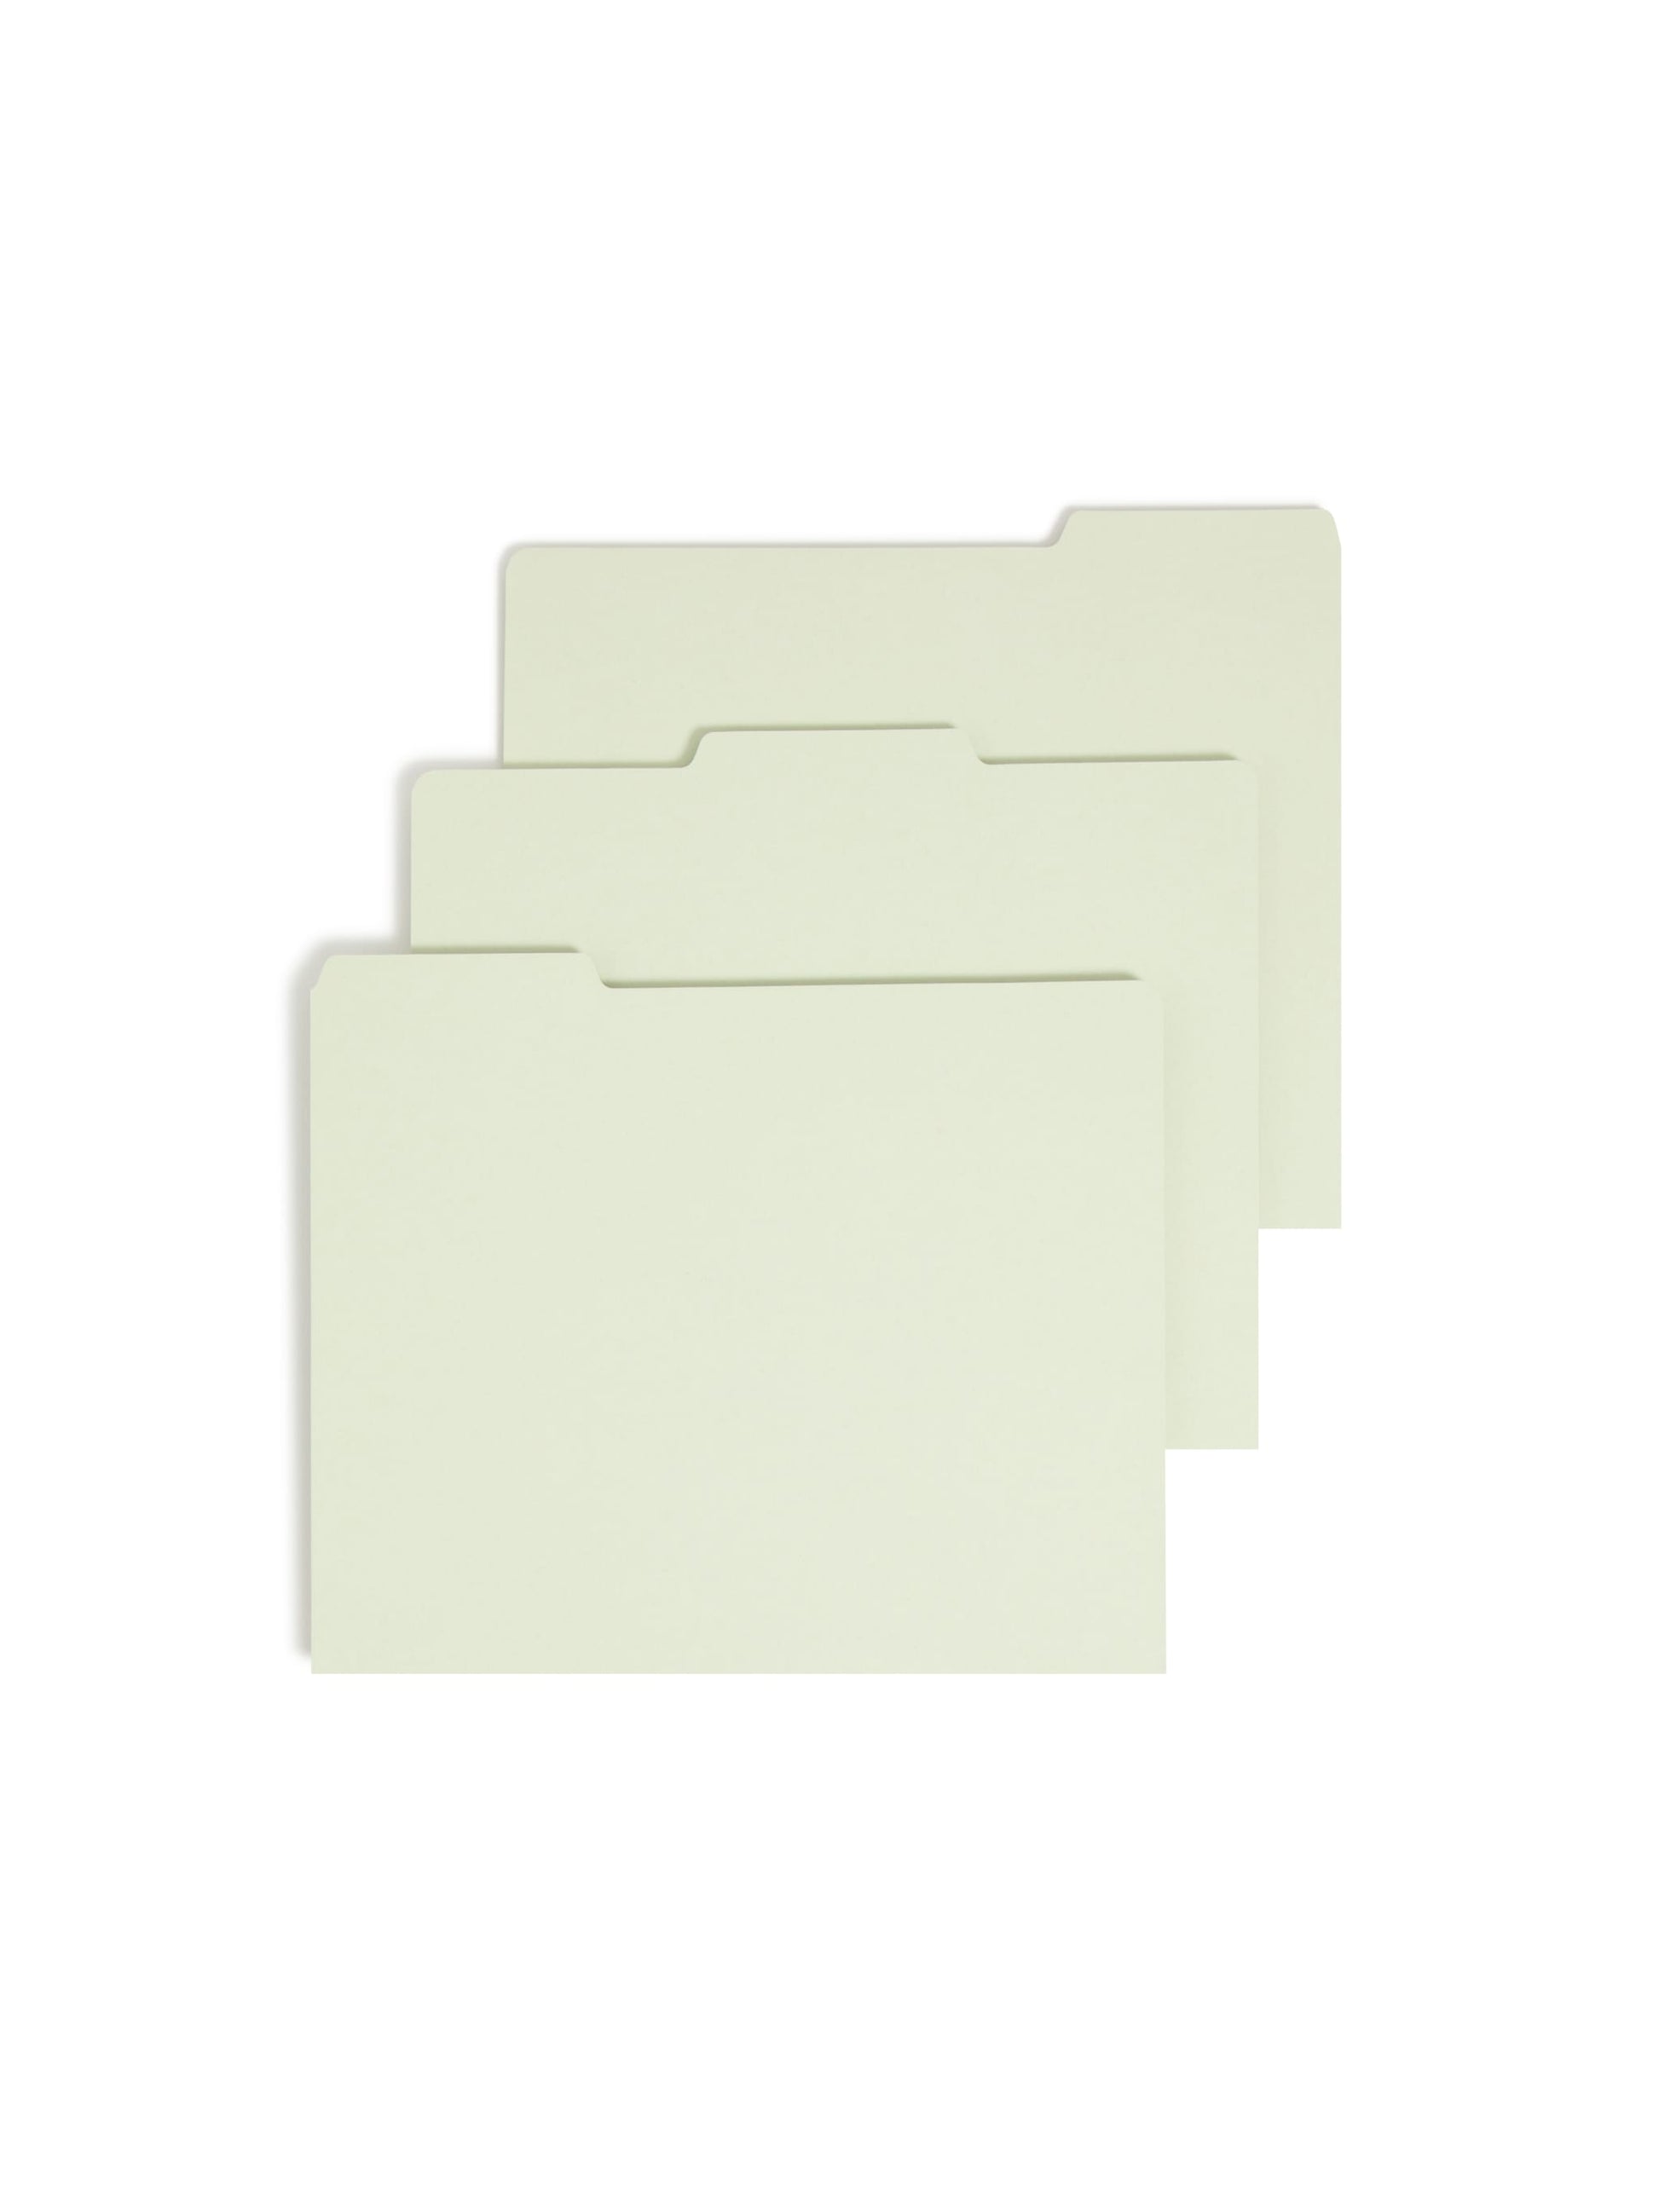 Heavyweight Filing Guides with Blank Tabs, Gray/Green Color, Letter Size, Set of 100, 086486503341